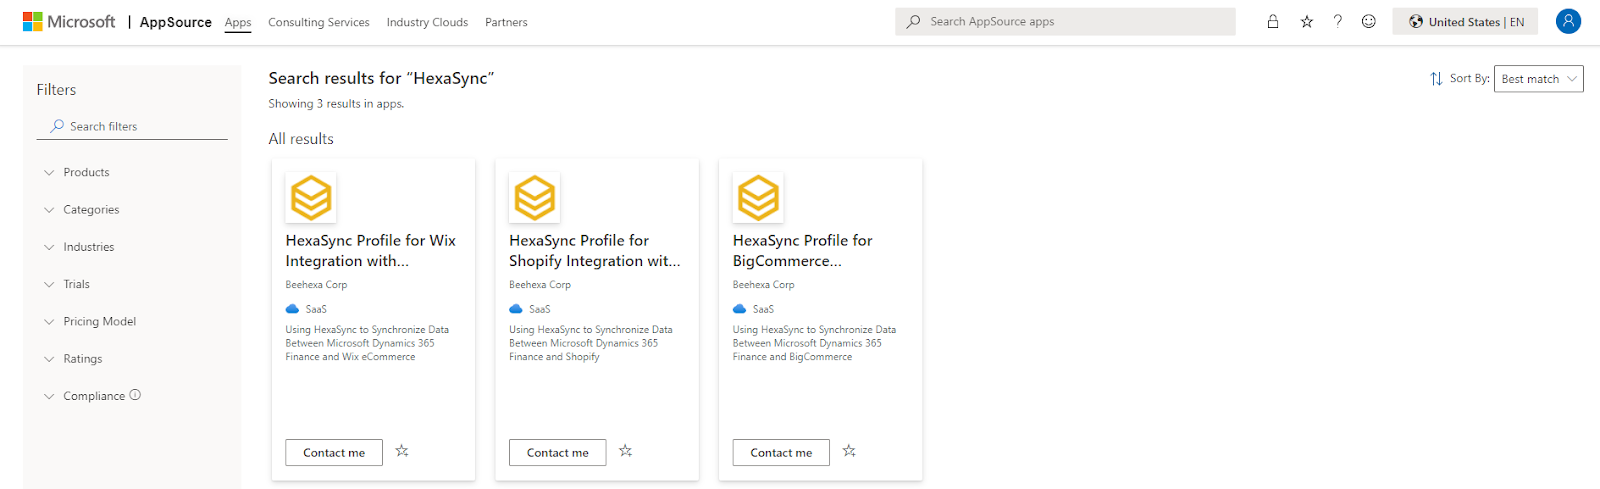 HexaSync application is now available on Microsoft AppSource